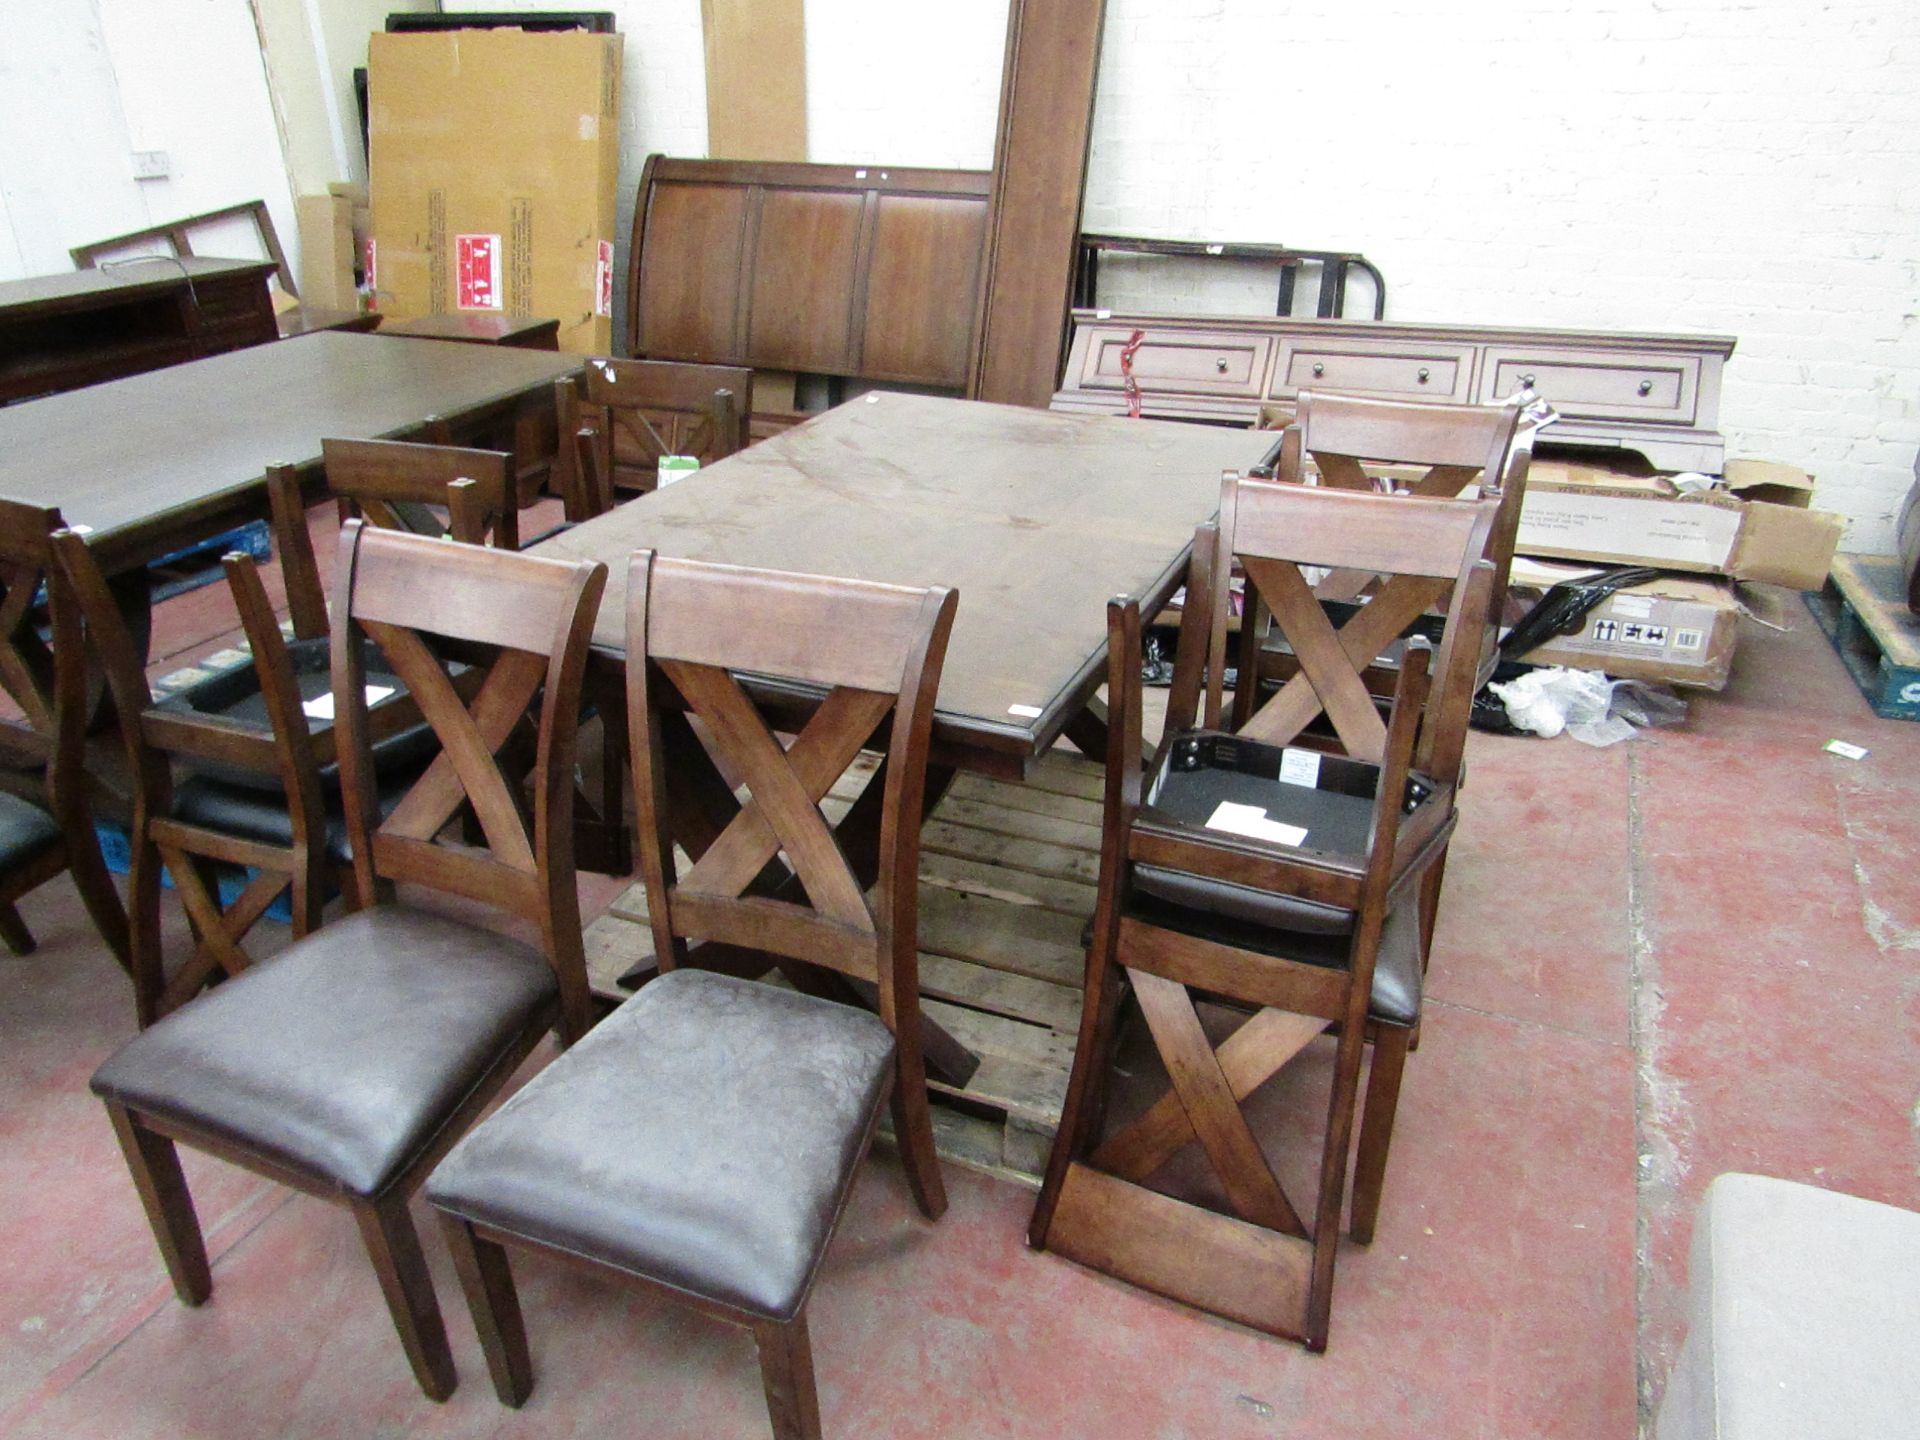 Bayside 7 piece extending dining set, complete but minor scuffs and scrapes on the table and chairs,